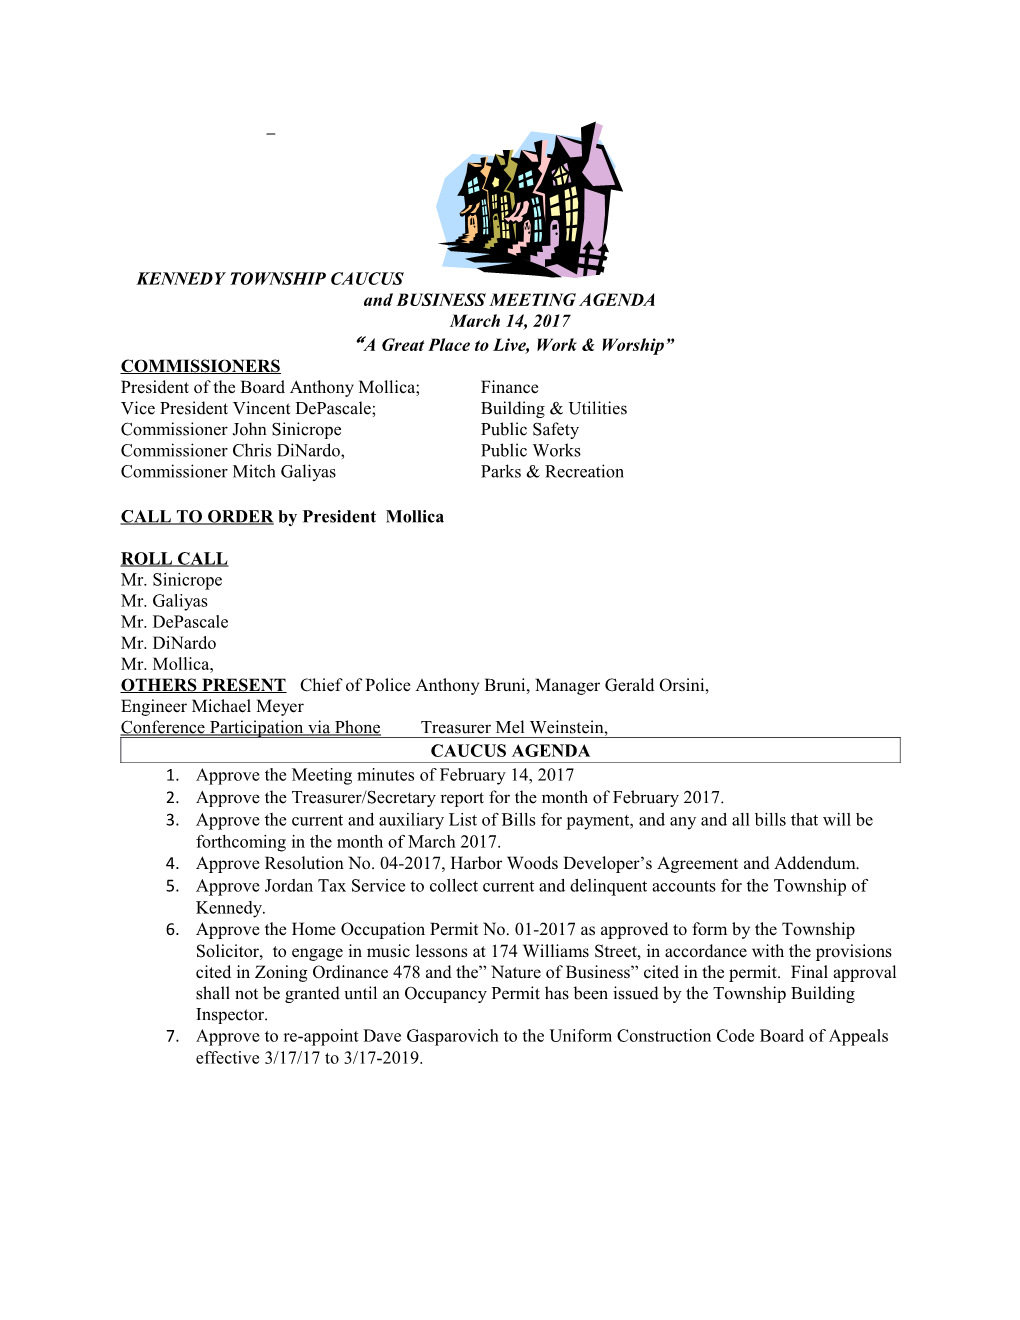 KENNEDY TOWNSHIP CAUCUS and BUSINESS MEETING AGENDA